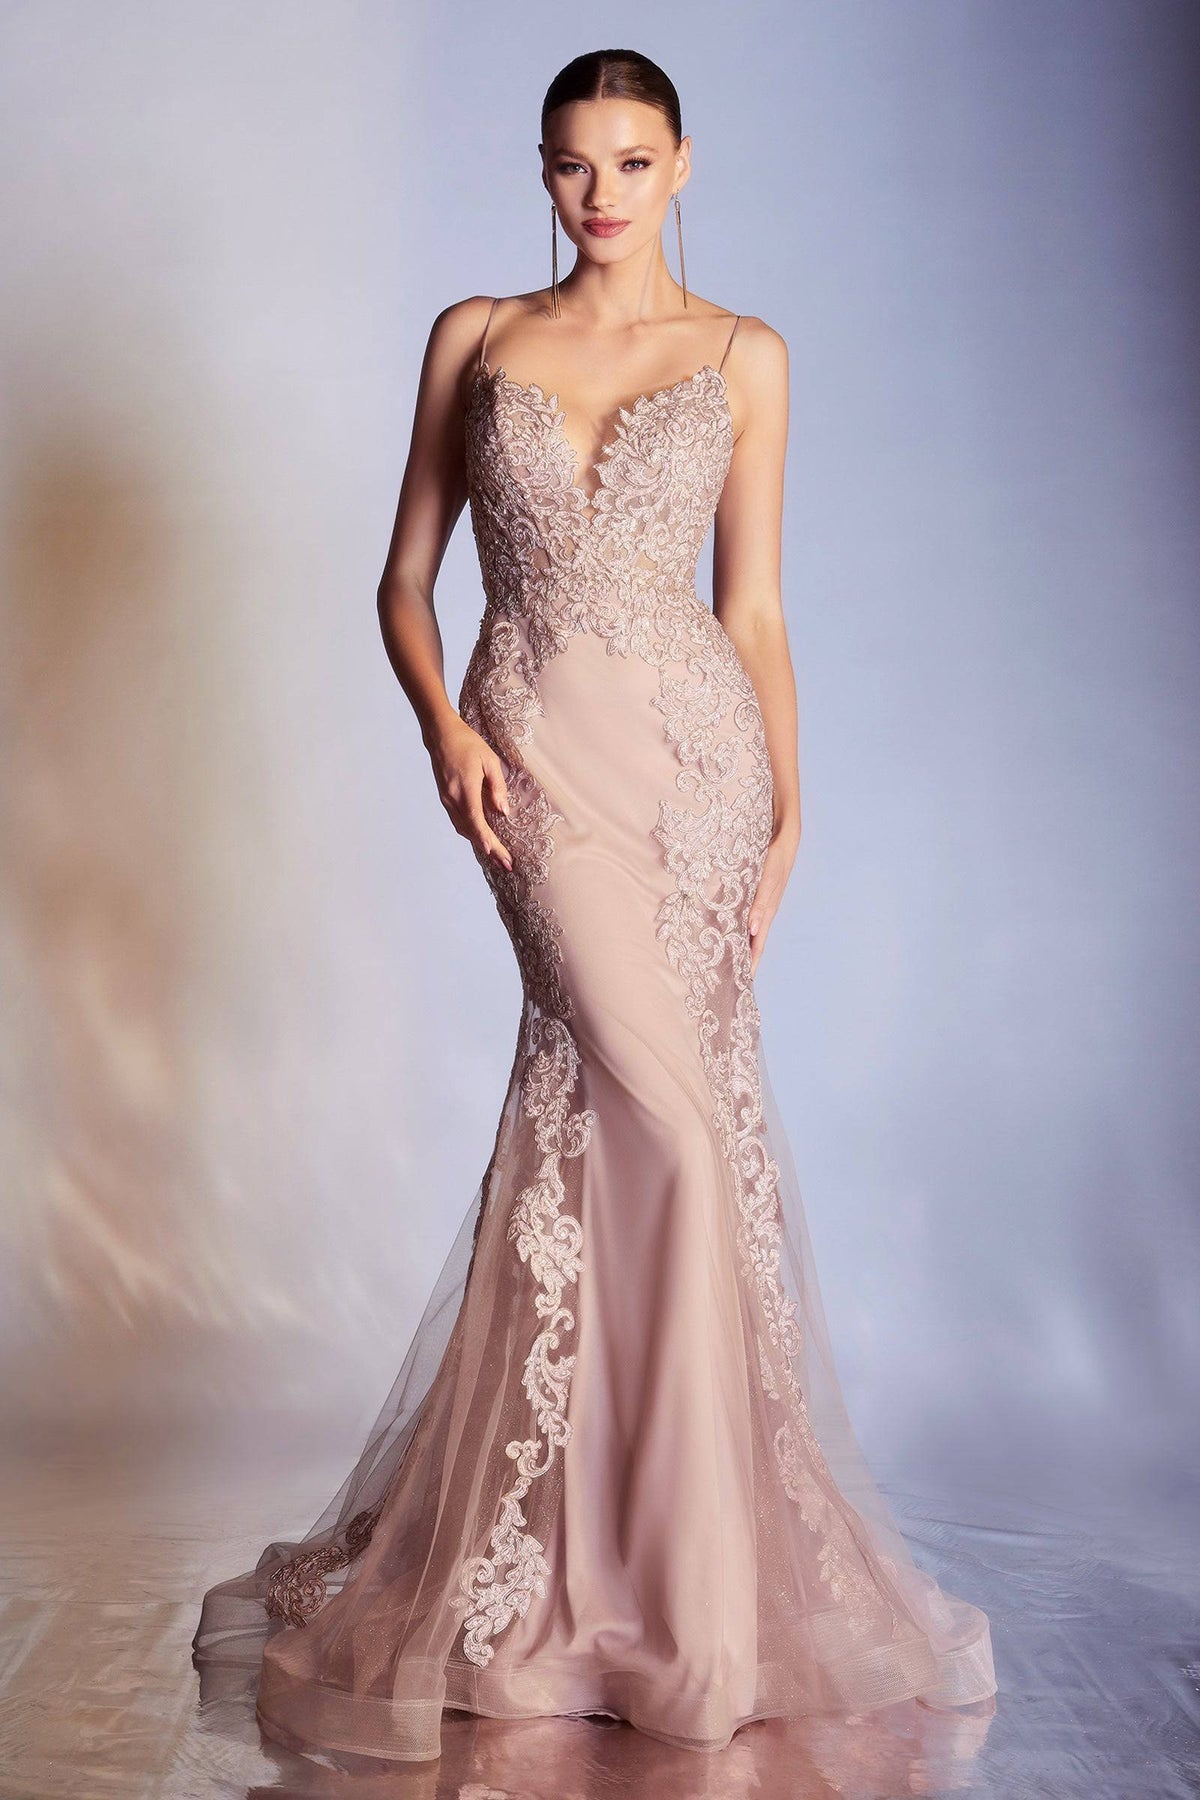 Elegant Mermaid Style Gown with Embroidered Bodice and Deep Neckline #CDCD945 - NORMA REED